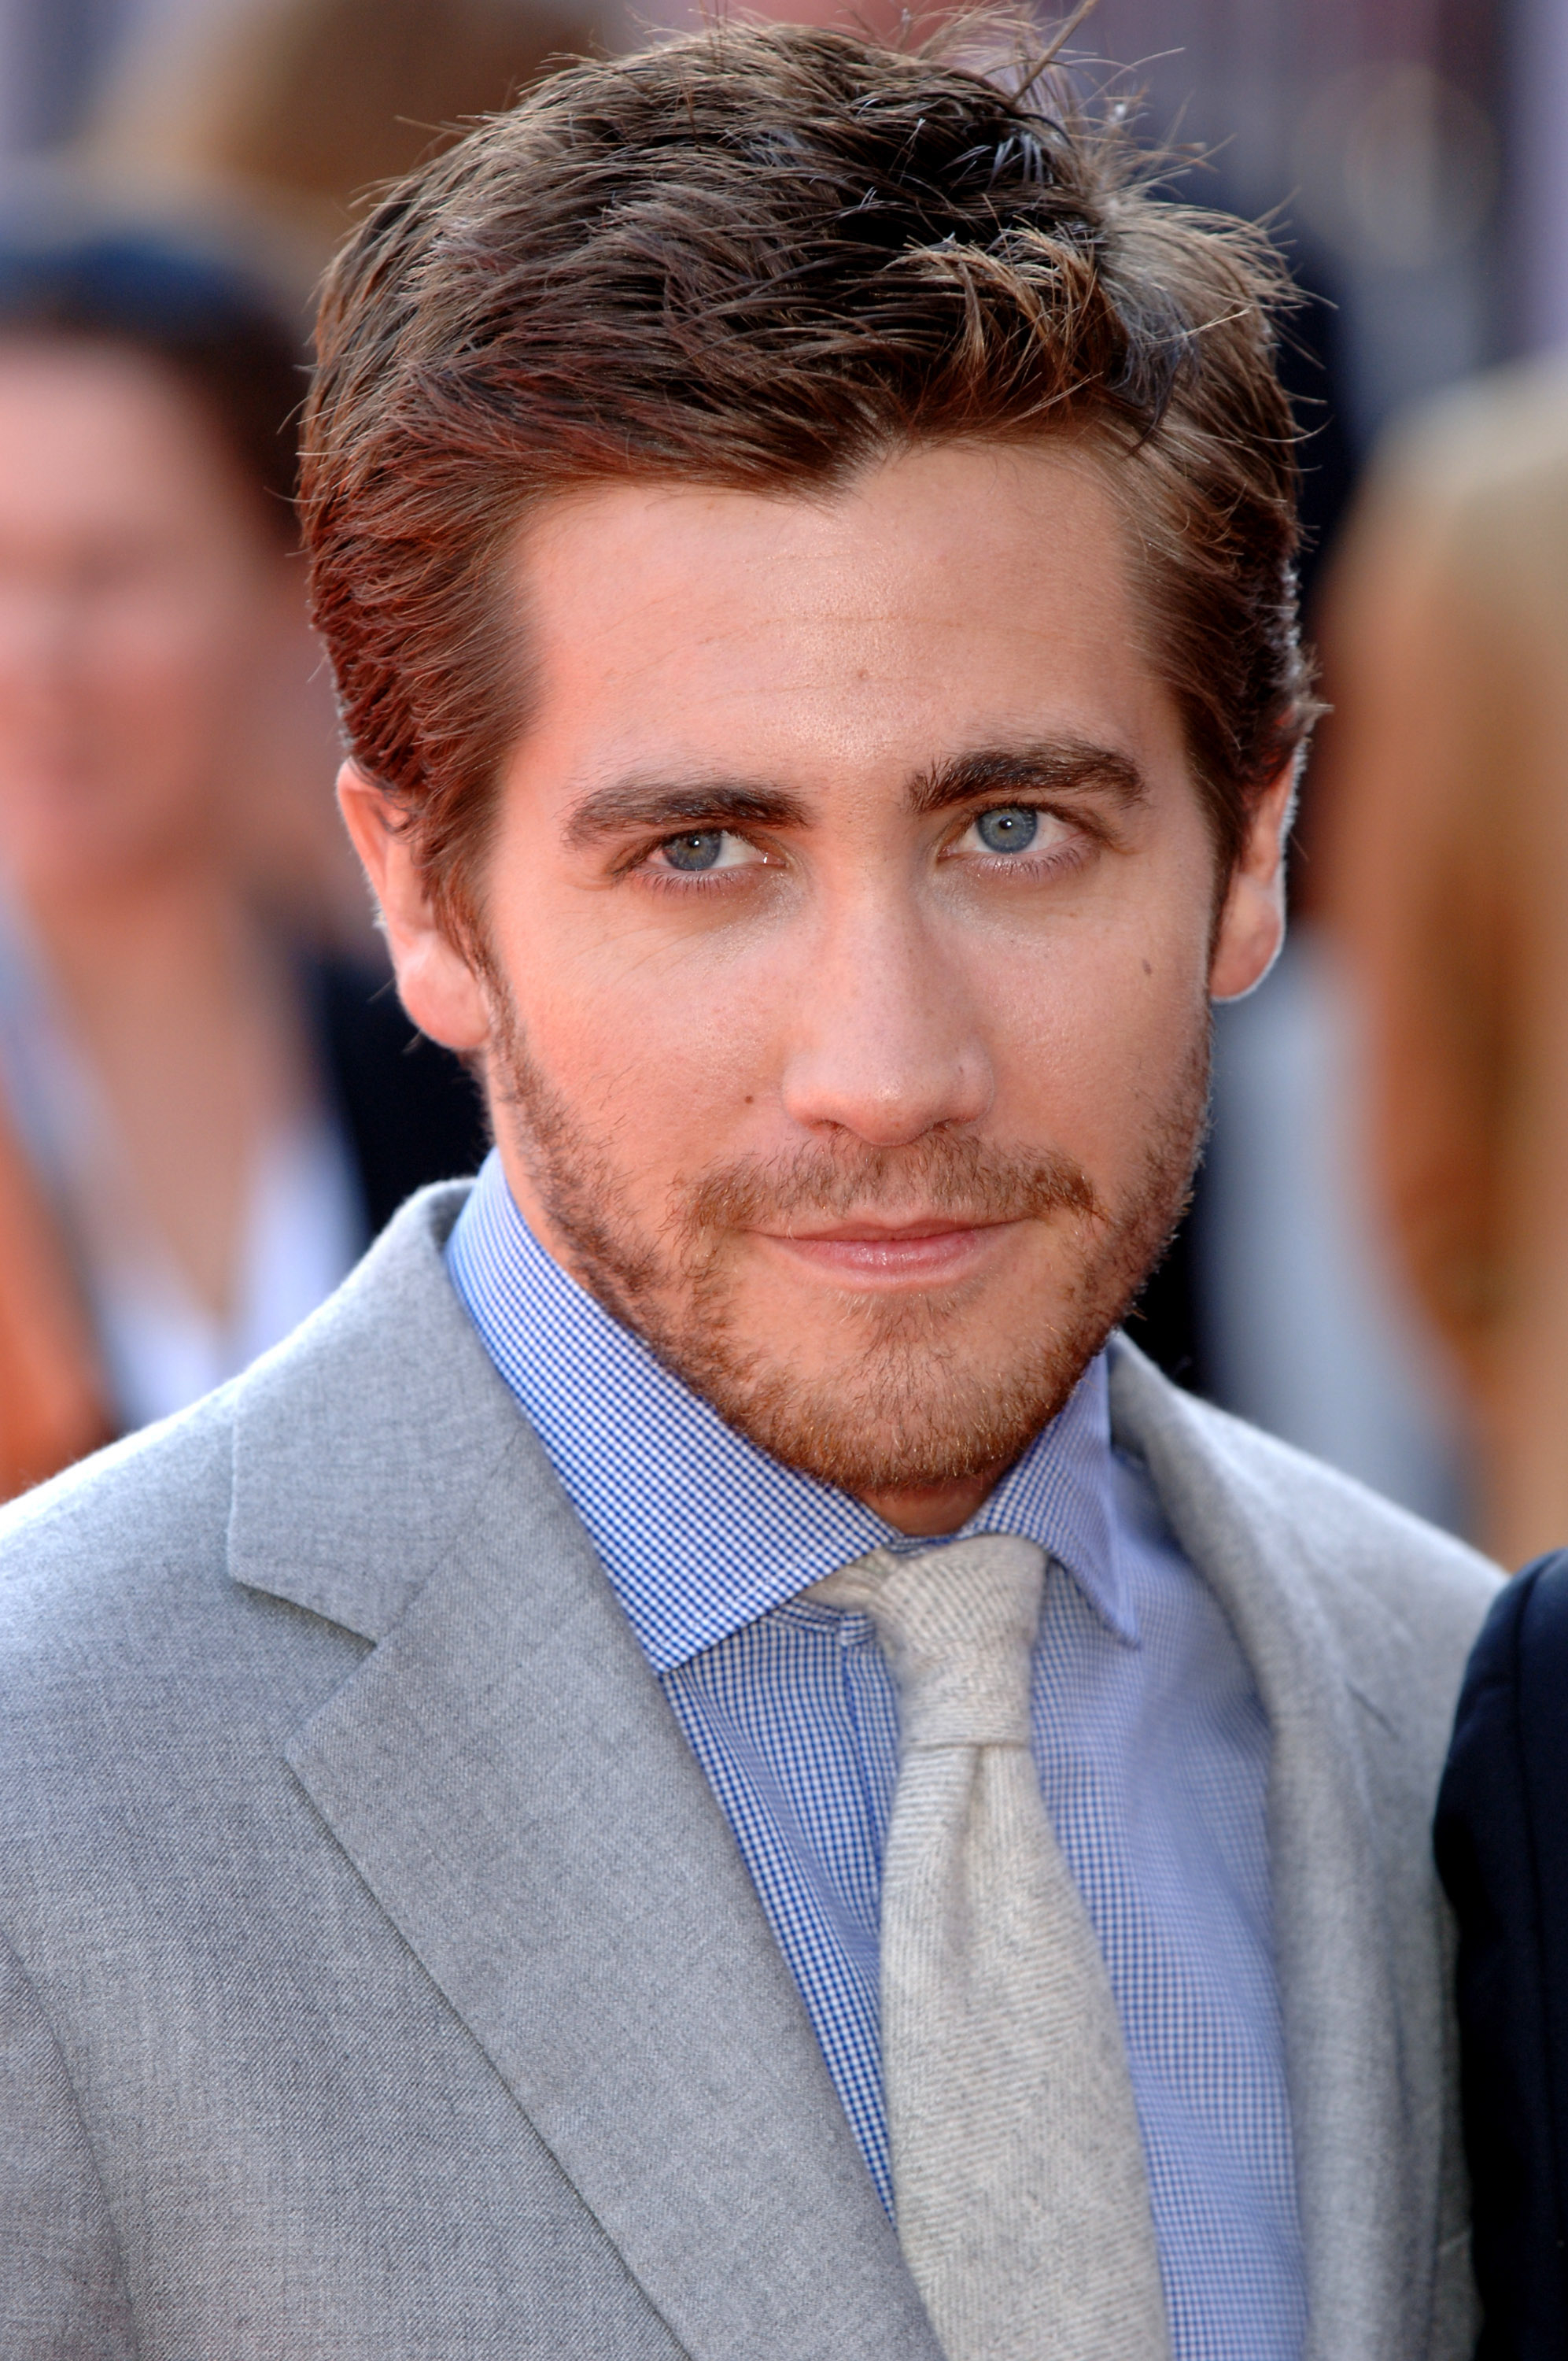 Jake in a suit and tie on the red carpet